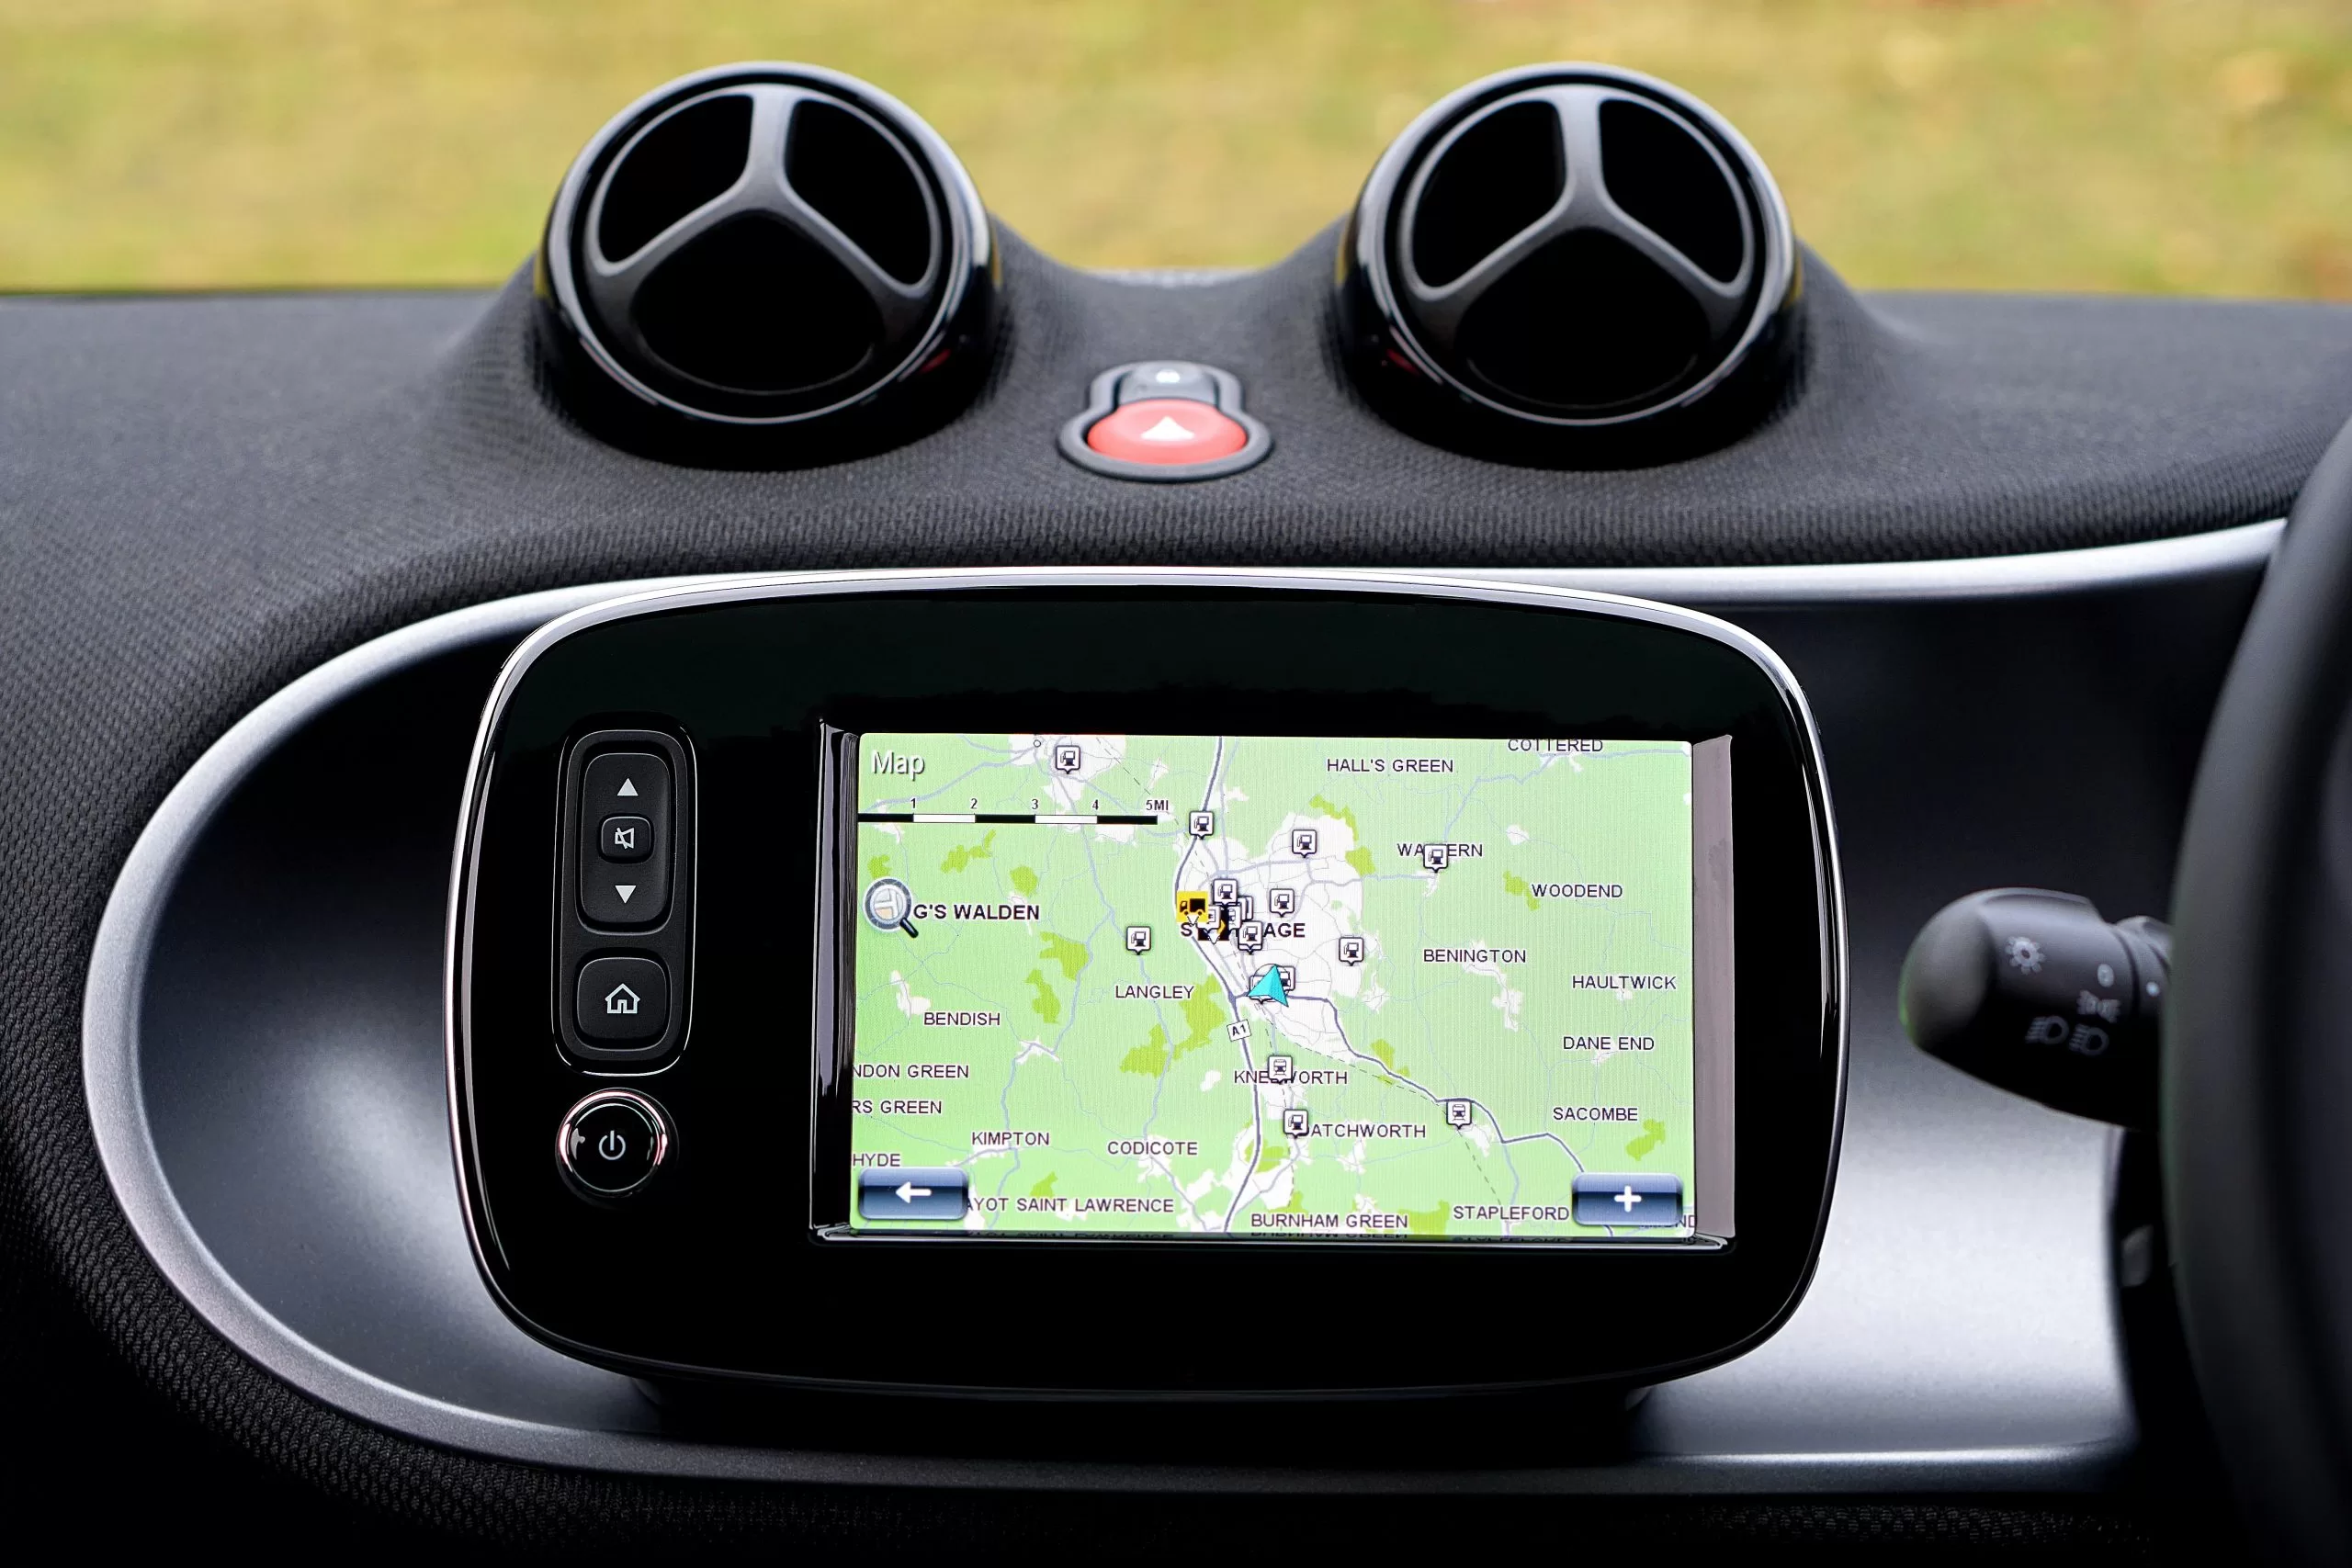 Image of a GPS device